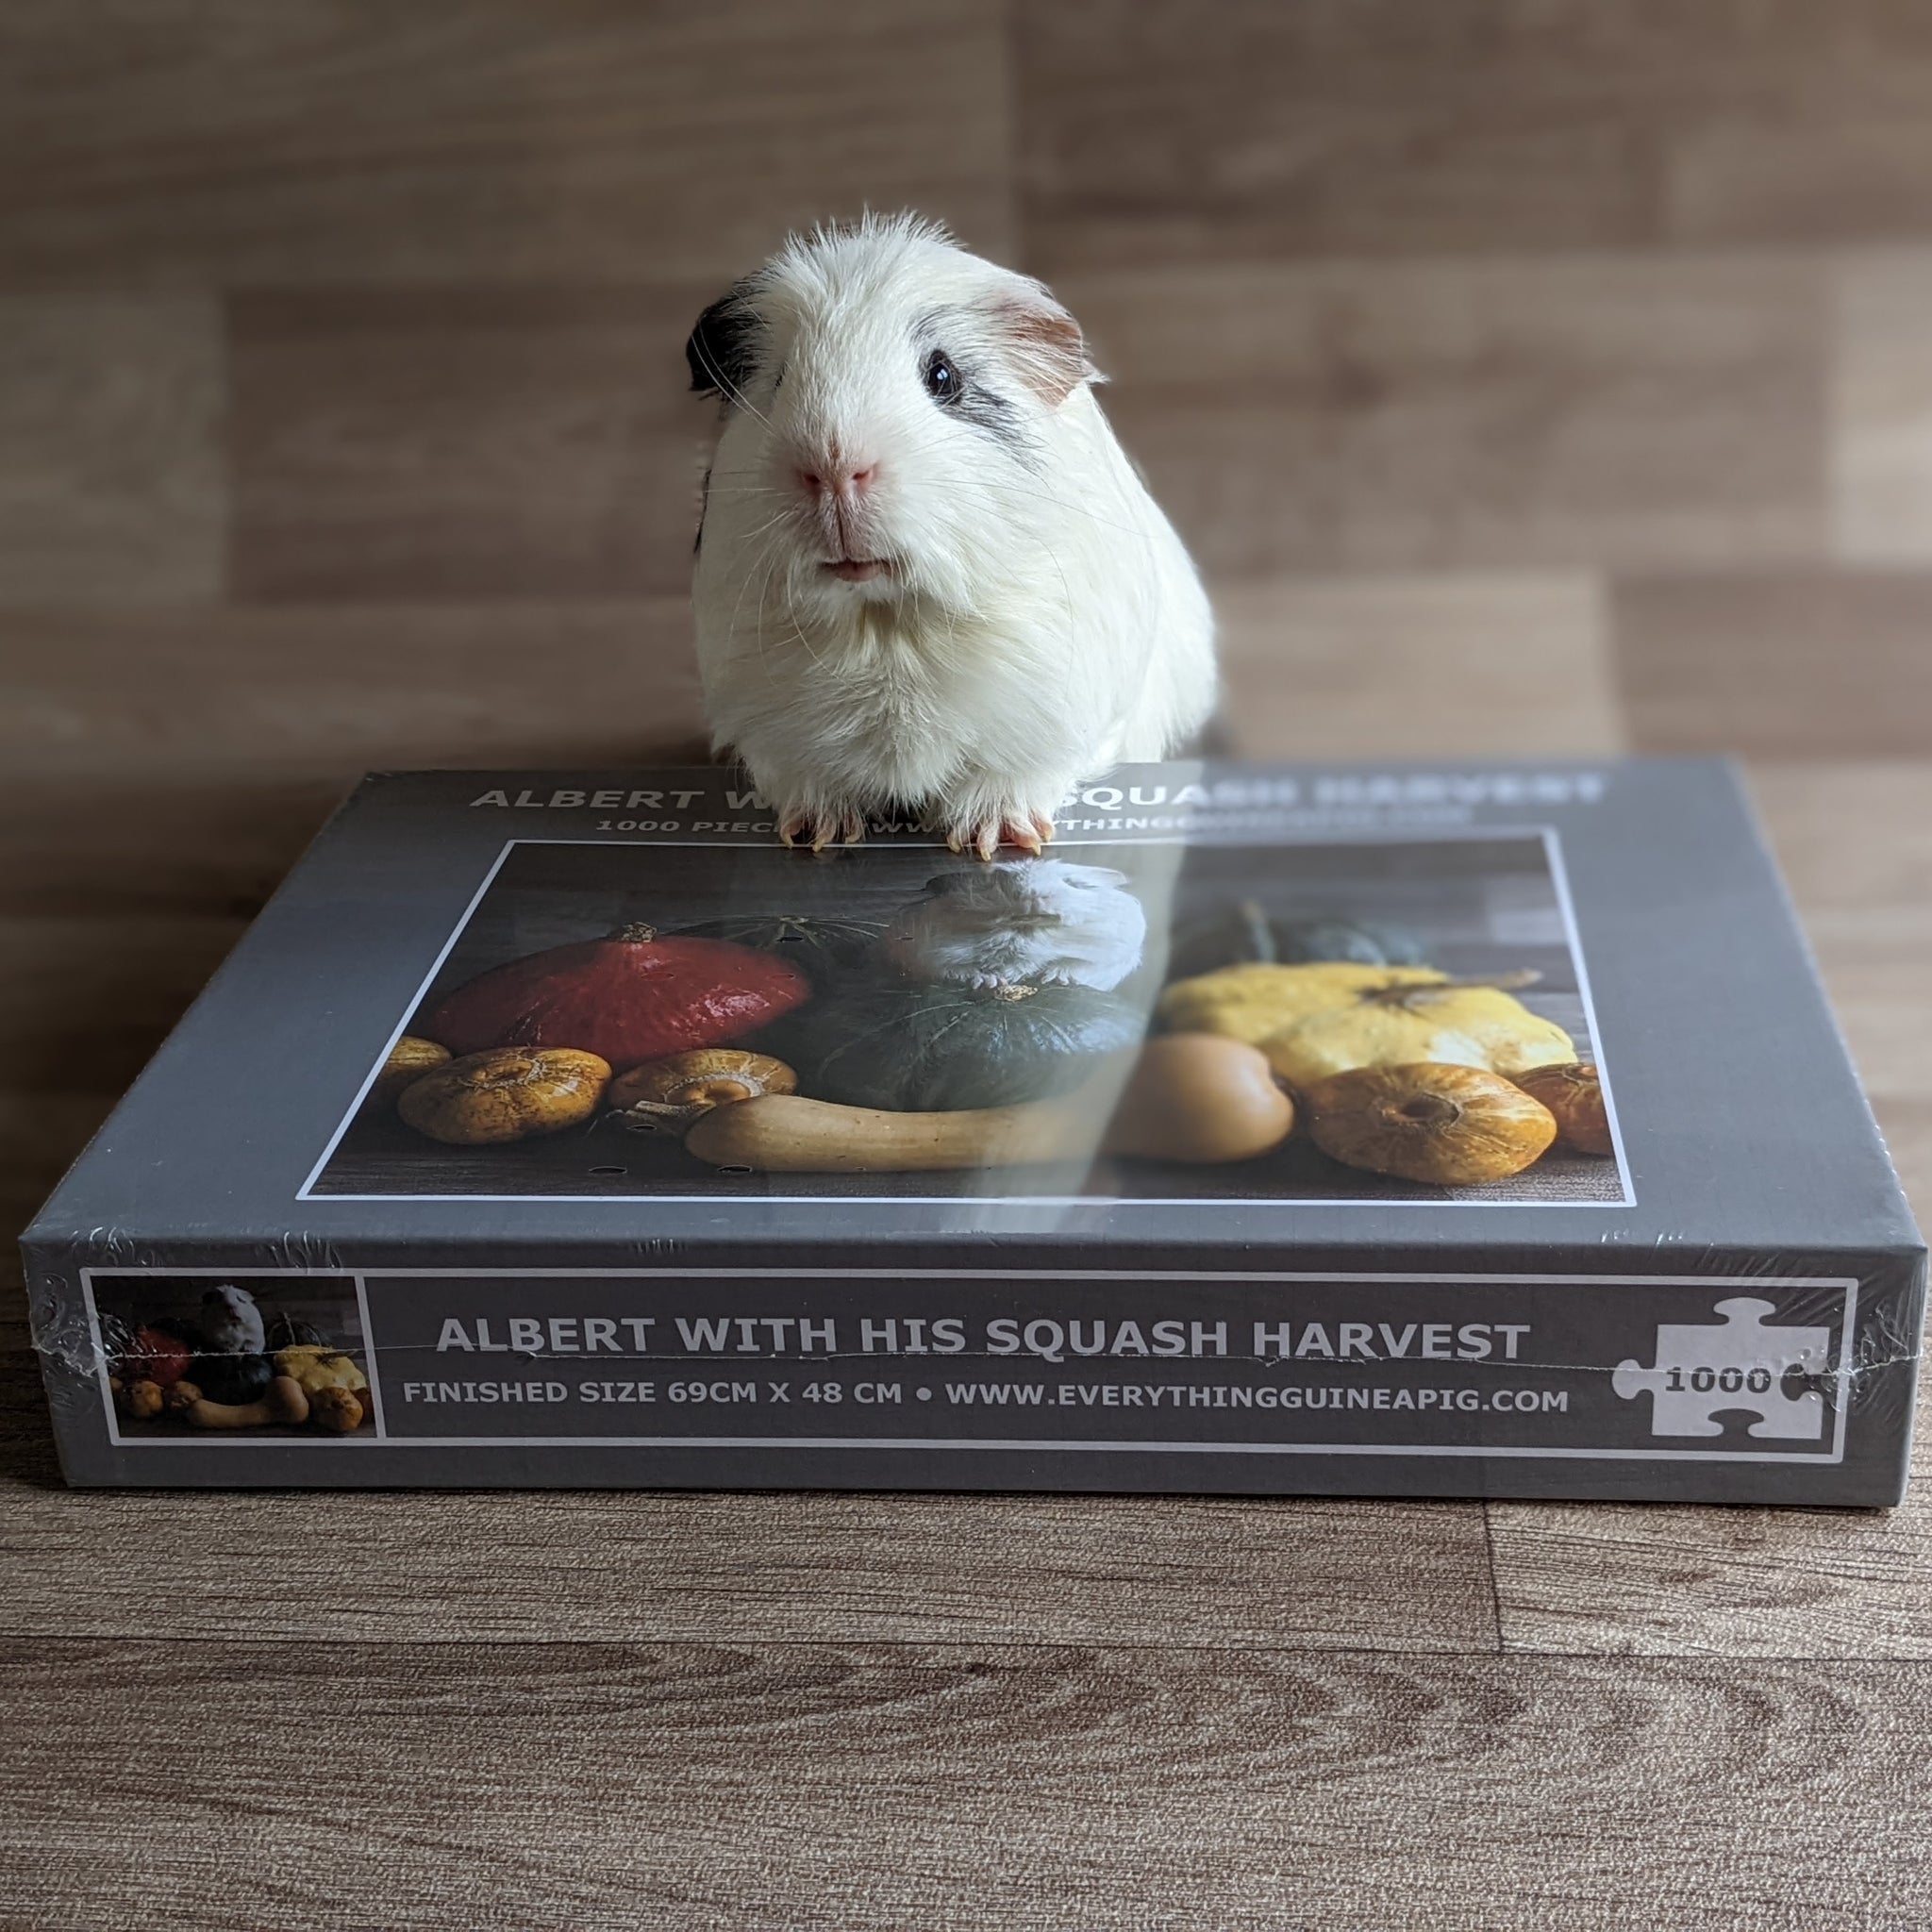 Guinea Pig Jigsaw Puzzle 1000 piece - Albert with his Squash Harvest